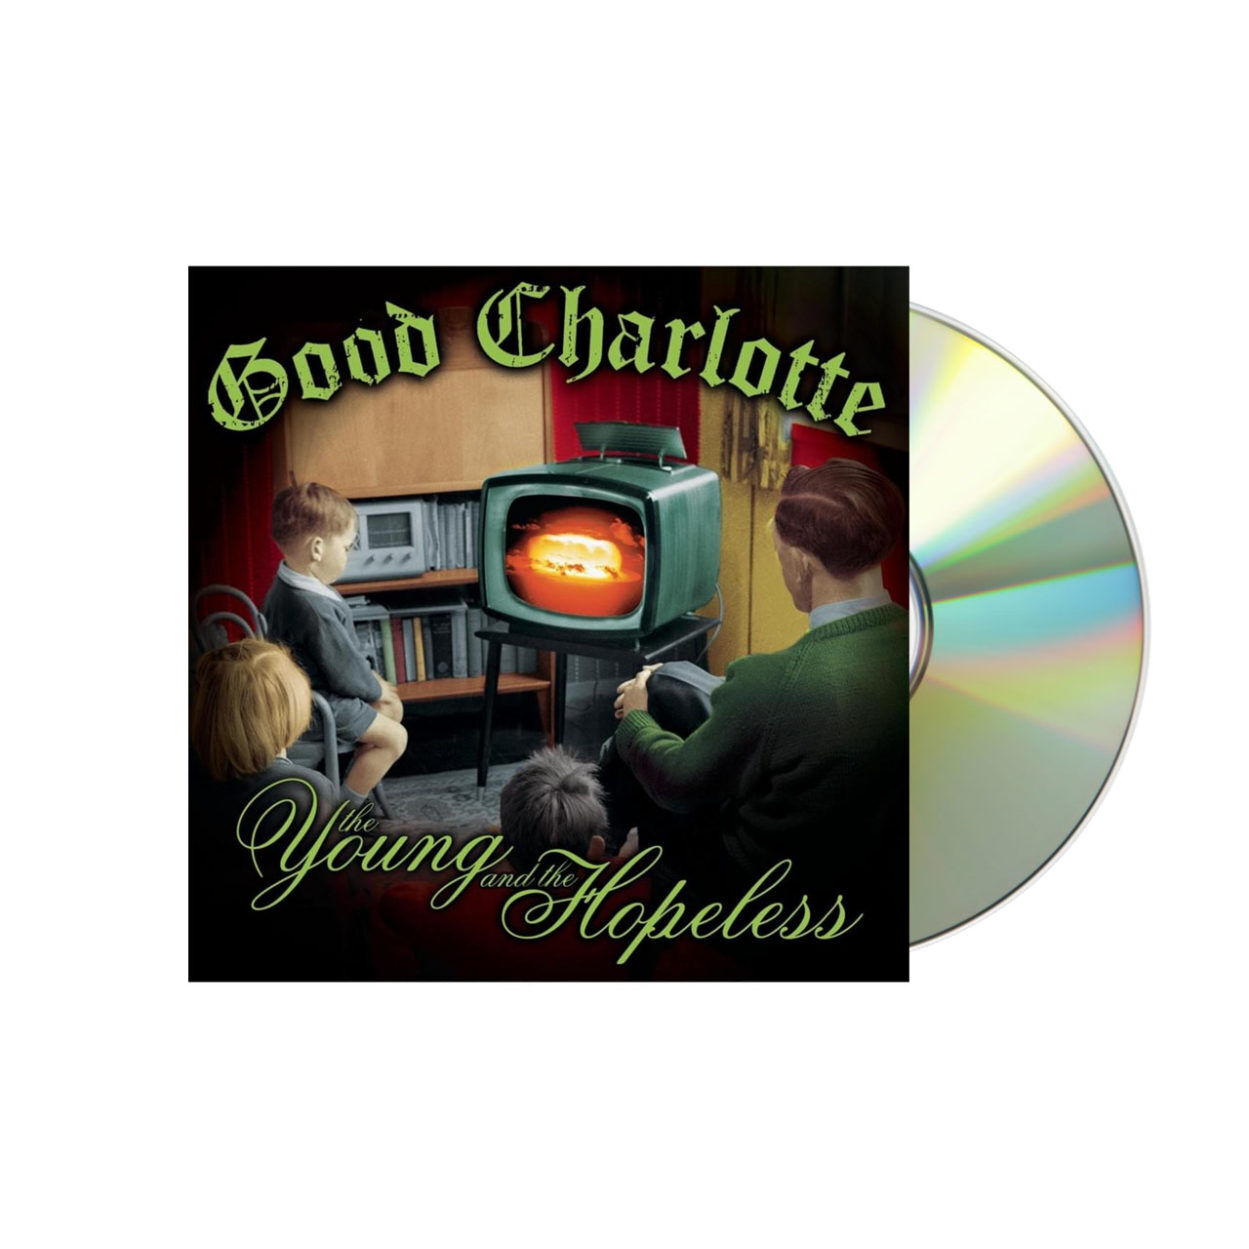 GOOD CHARLOTTE The Young And The Hopeless CD